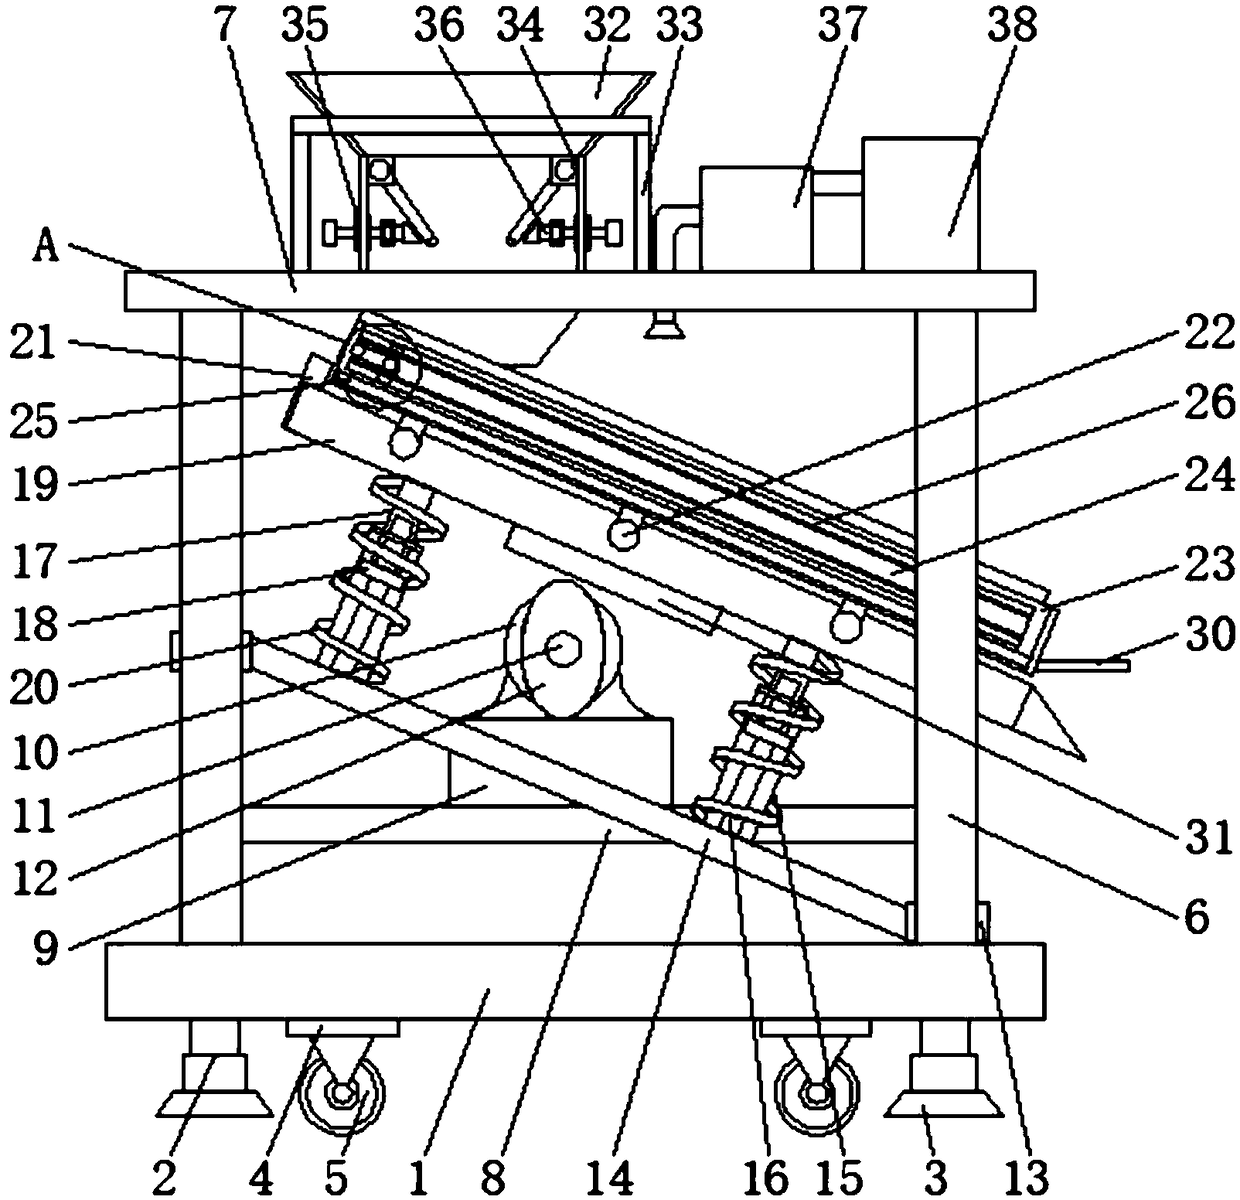 Sand screening device for building equipment